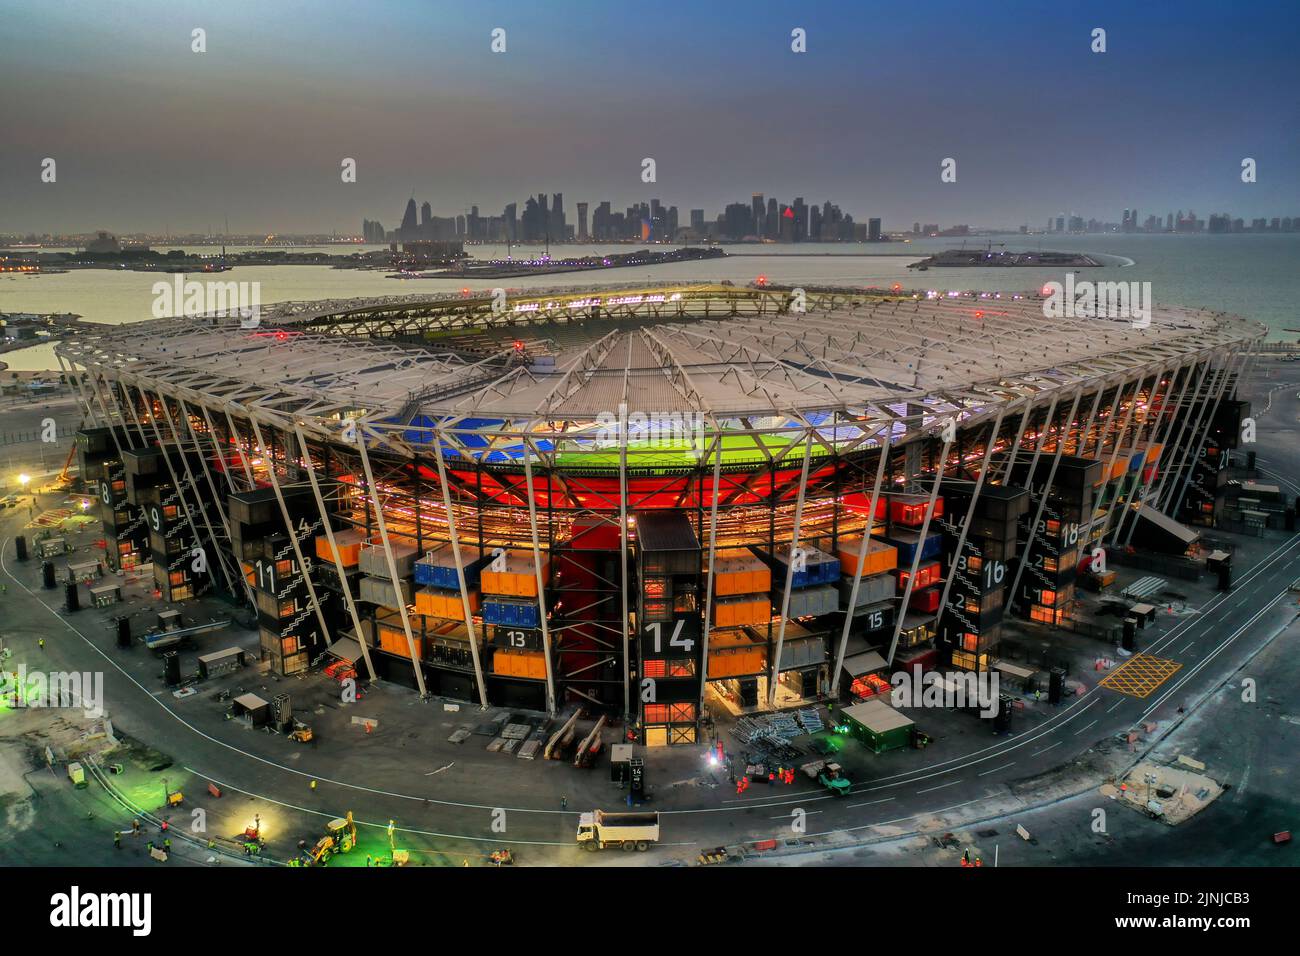 Doha. 12th Aug, 2022. Photo taken on Sept. 1, 2021 shows the aerial view of 974 Stadium which will host the 2022 FIFA World Cup matches in Doha, Qatar. Credit: Xinhua/Alamy Live News Stock Photo